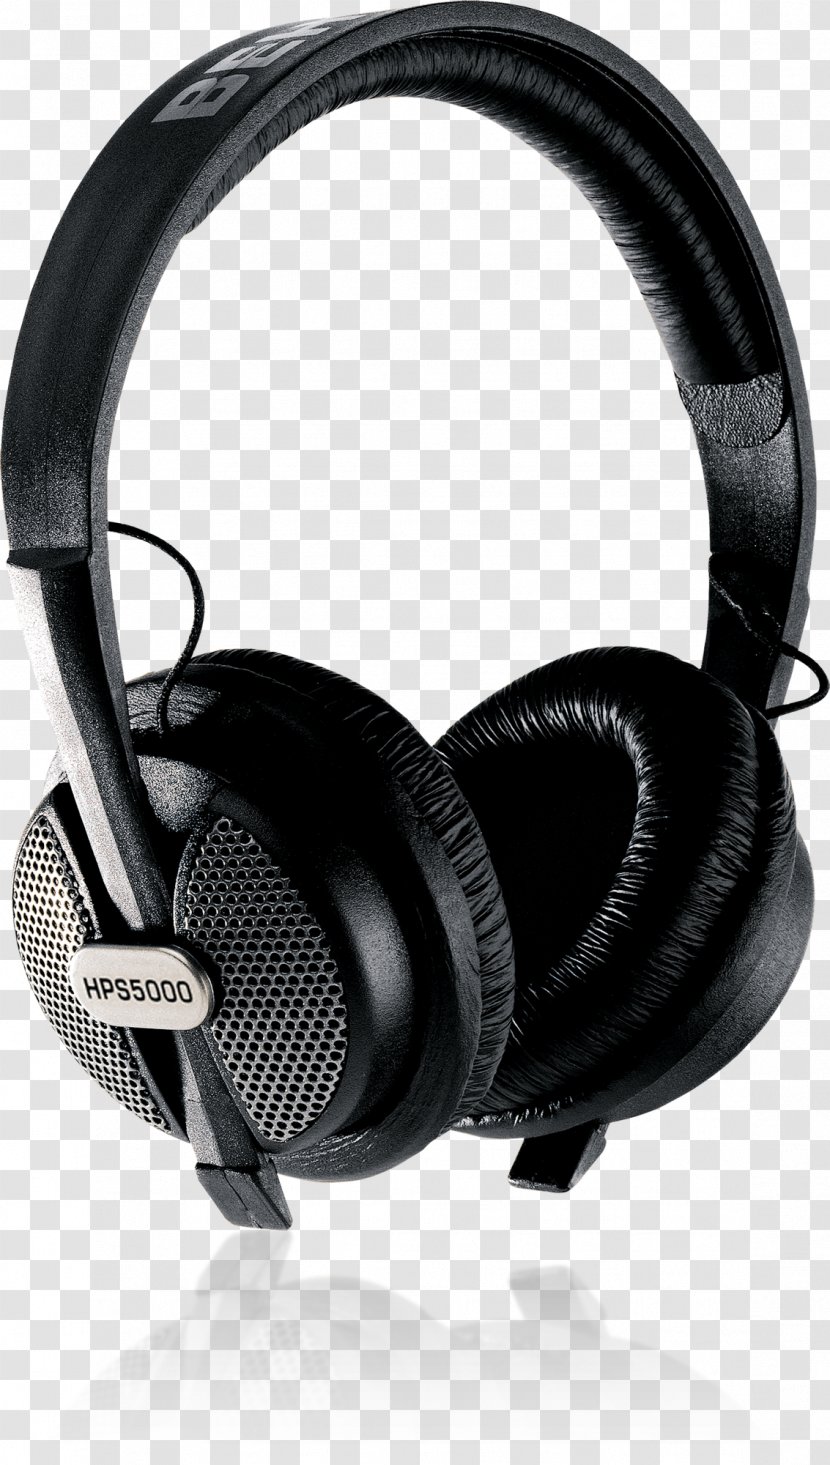 BEHRINGER HPS3000 Headphones Sound Recording And Reproduction Audio - Silhouette Transparent PNG